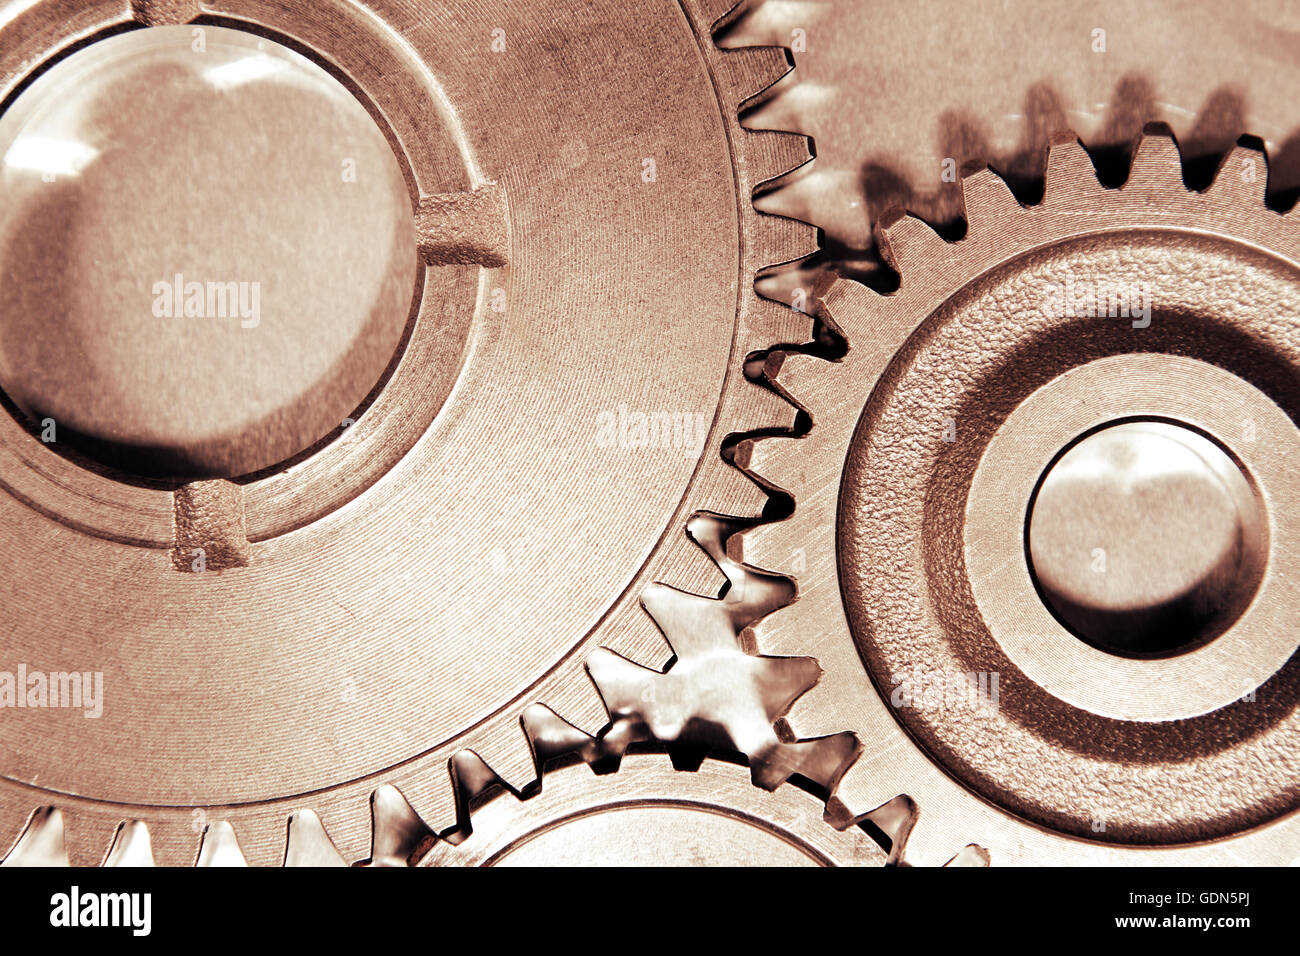 Metal cog gears joining together Stock Photo